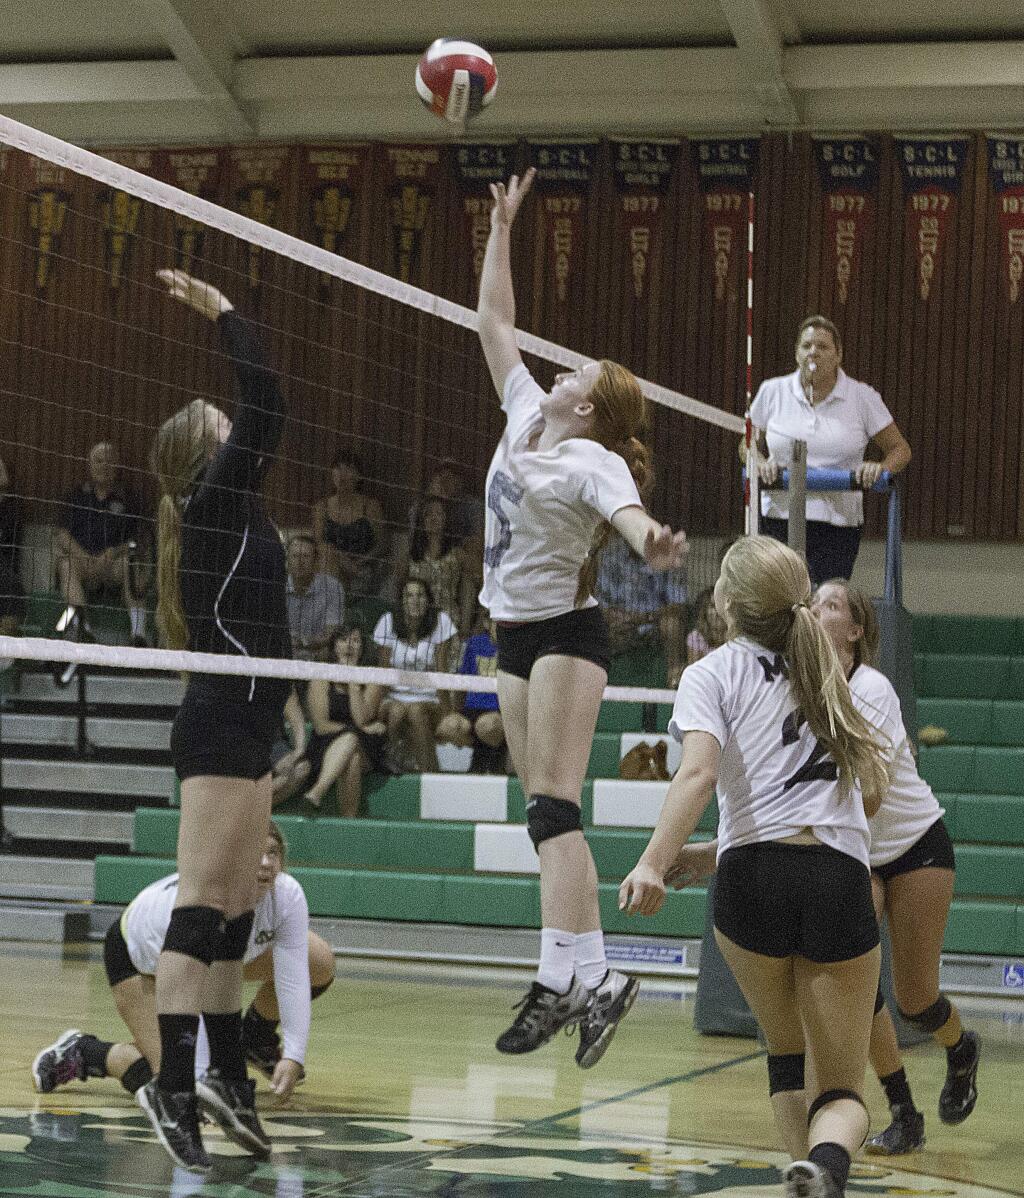 Sonoma Valley High School's girls volleyball team is in the middle of a strong season, most recently besting cross-county rival Sebastopol 3-0. (Photo by Robbi Pengelly/Index-Tribune)